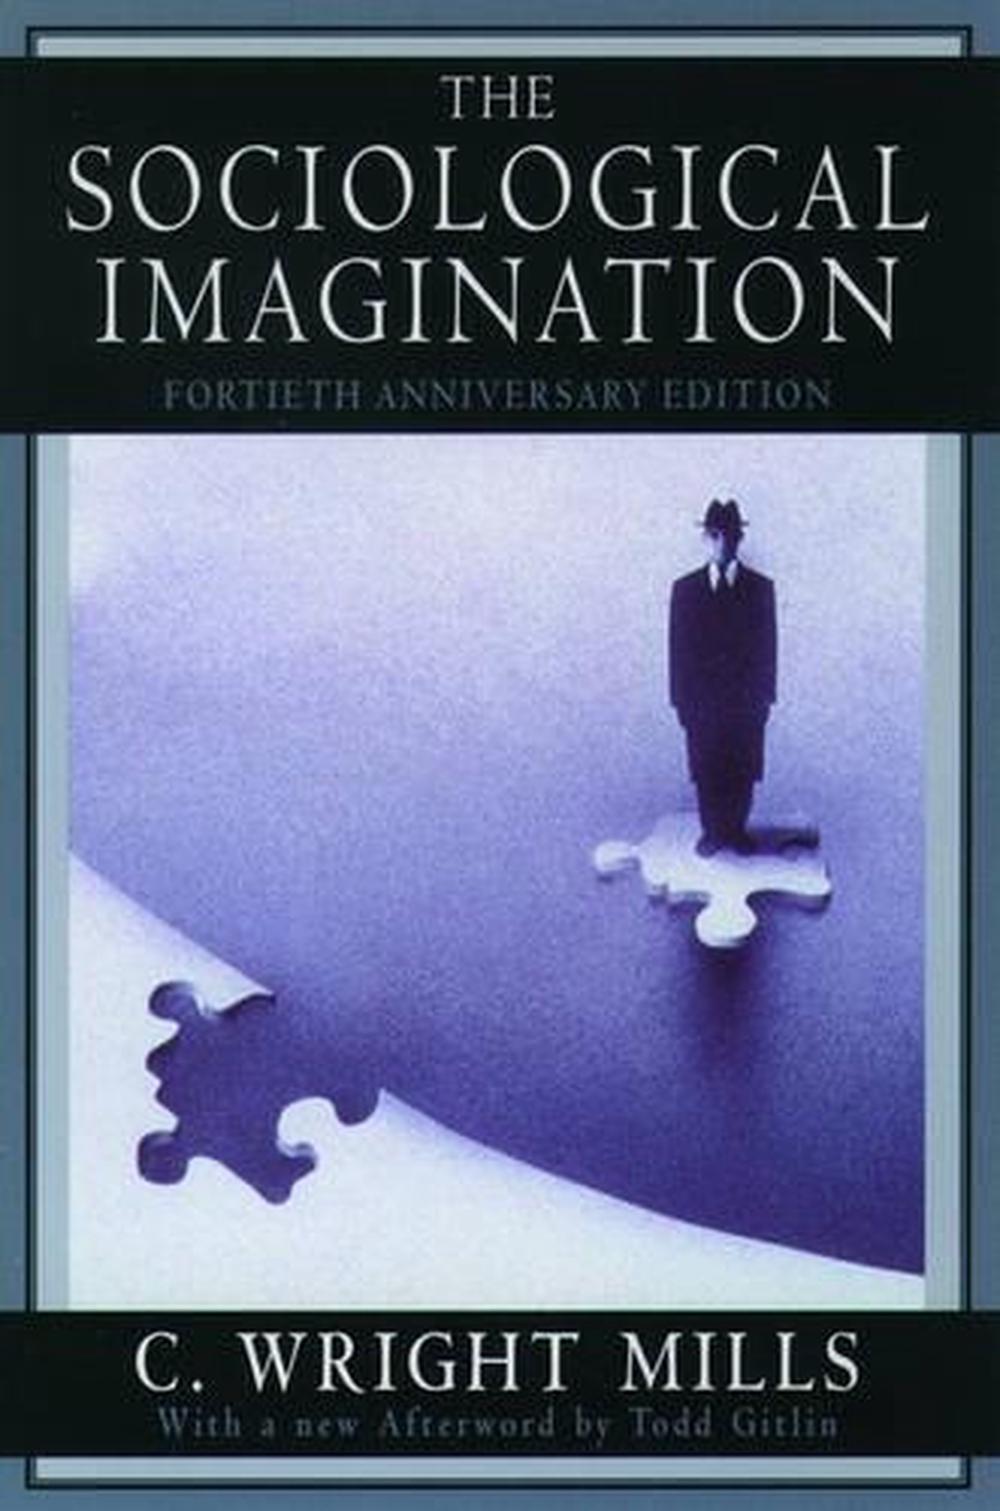 The Sociological Imagination By C Wright Mills Paperback 9780195133738 Buy Online At The Nile